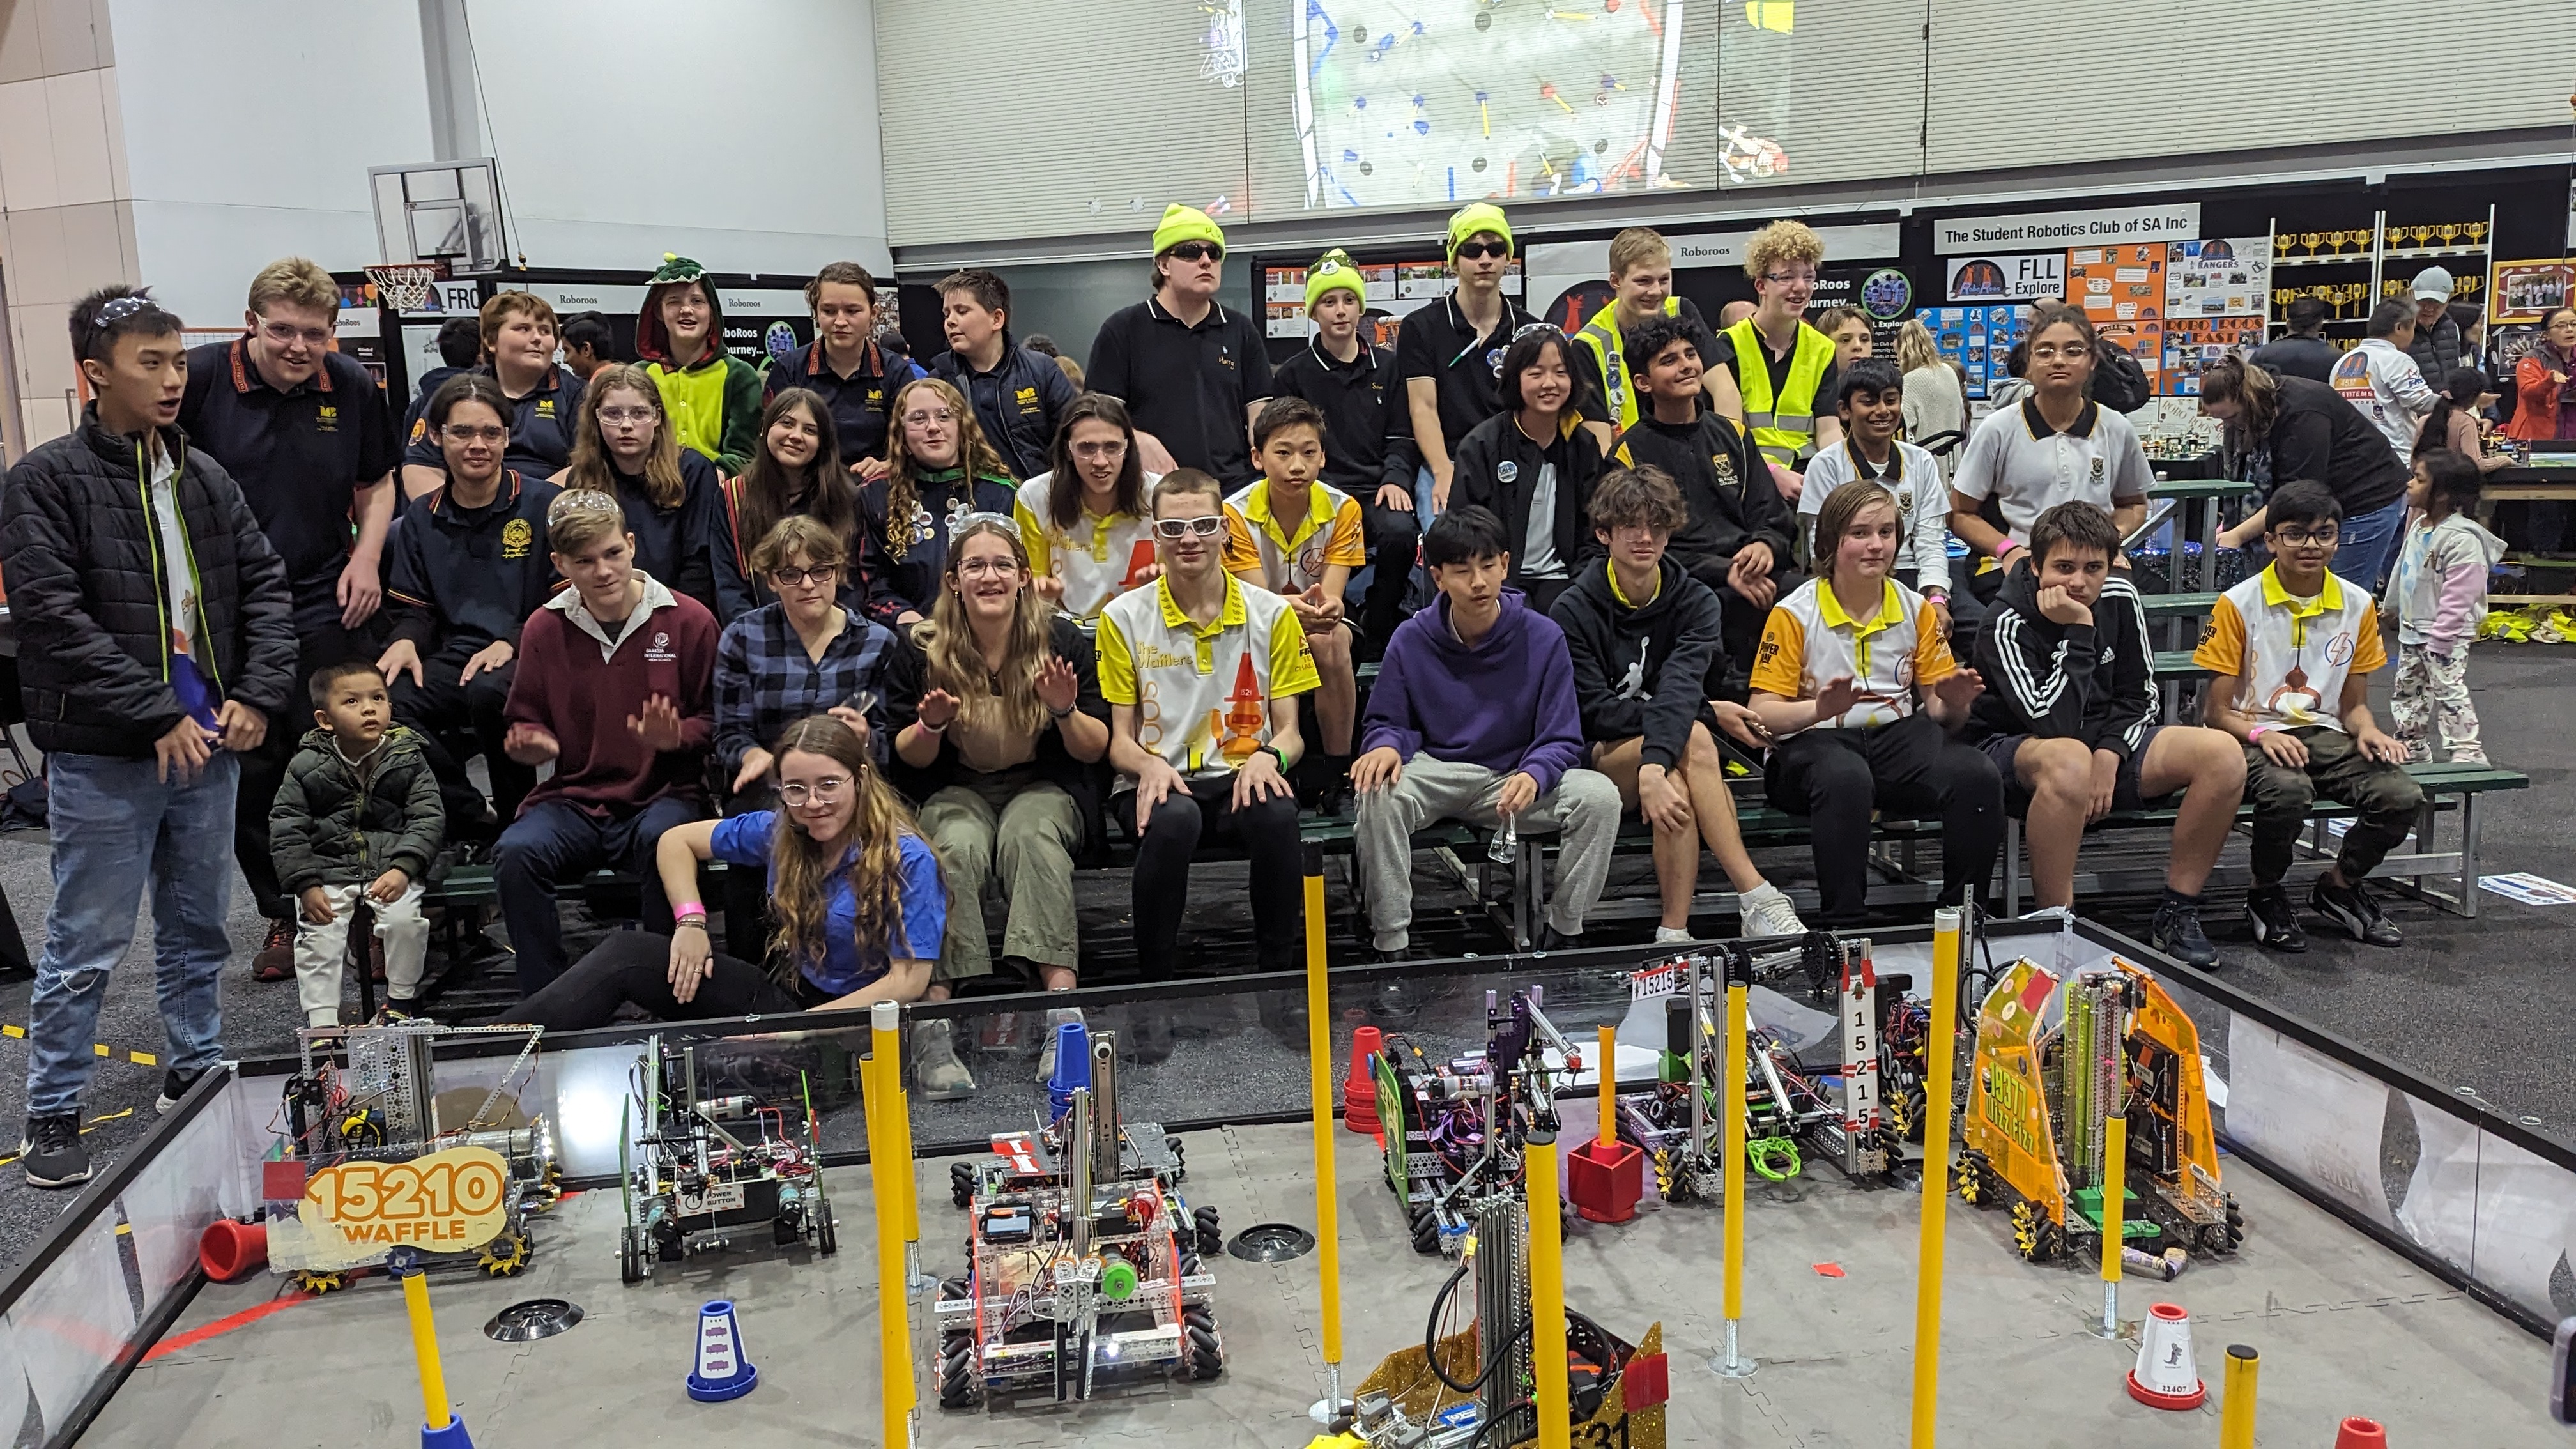 Copy oFTC robotics community in South Australia and their robots - see you all at the Kick-off!f PXL_20230806_061752650.jpg